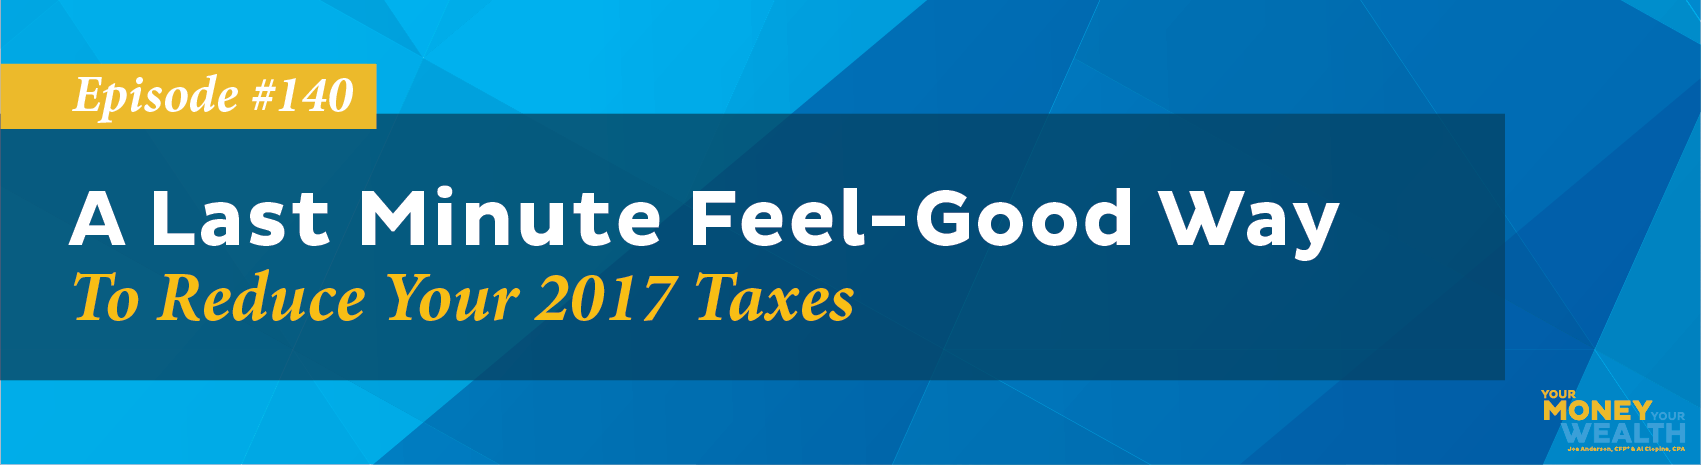 Reduce Your 2017 Taxes